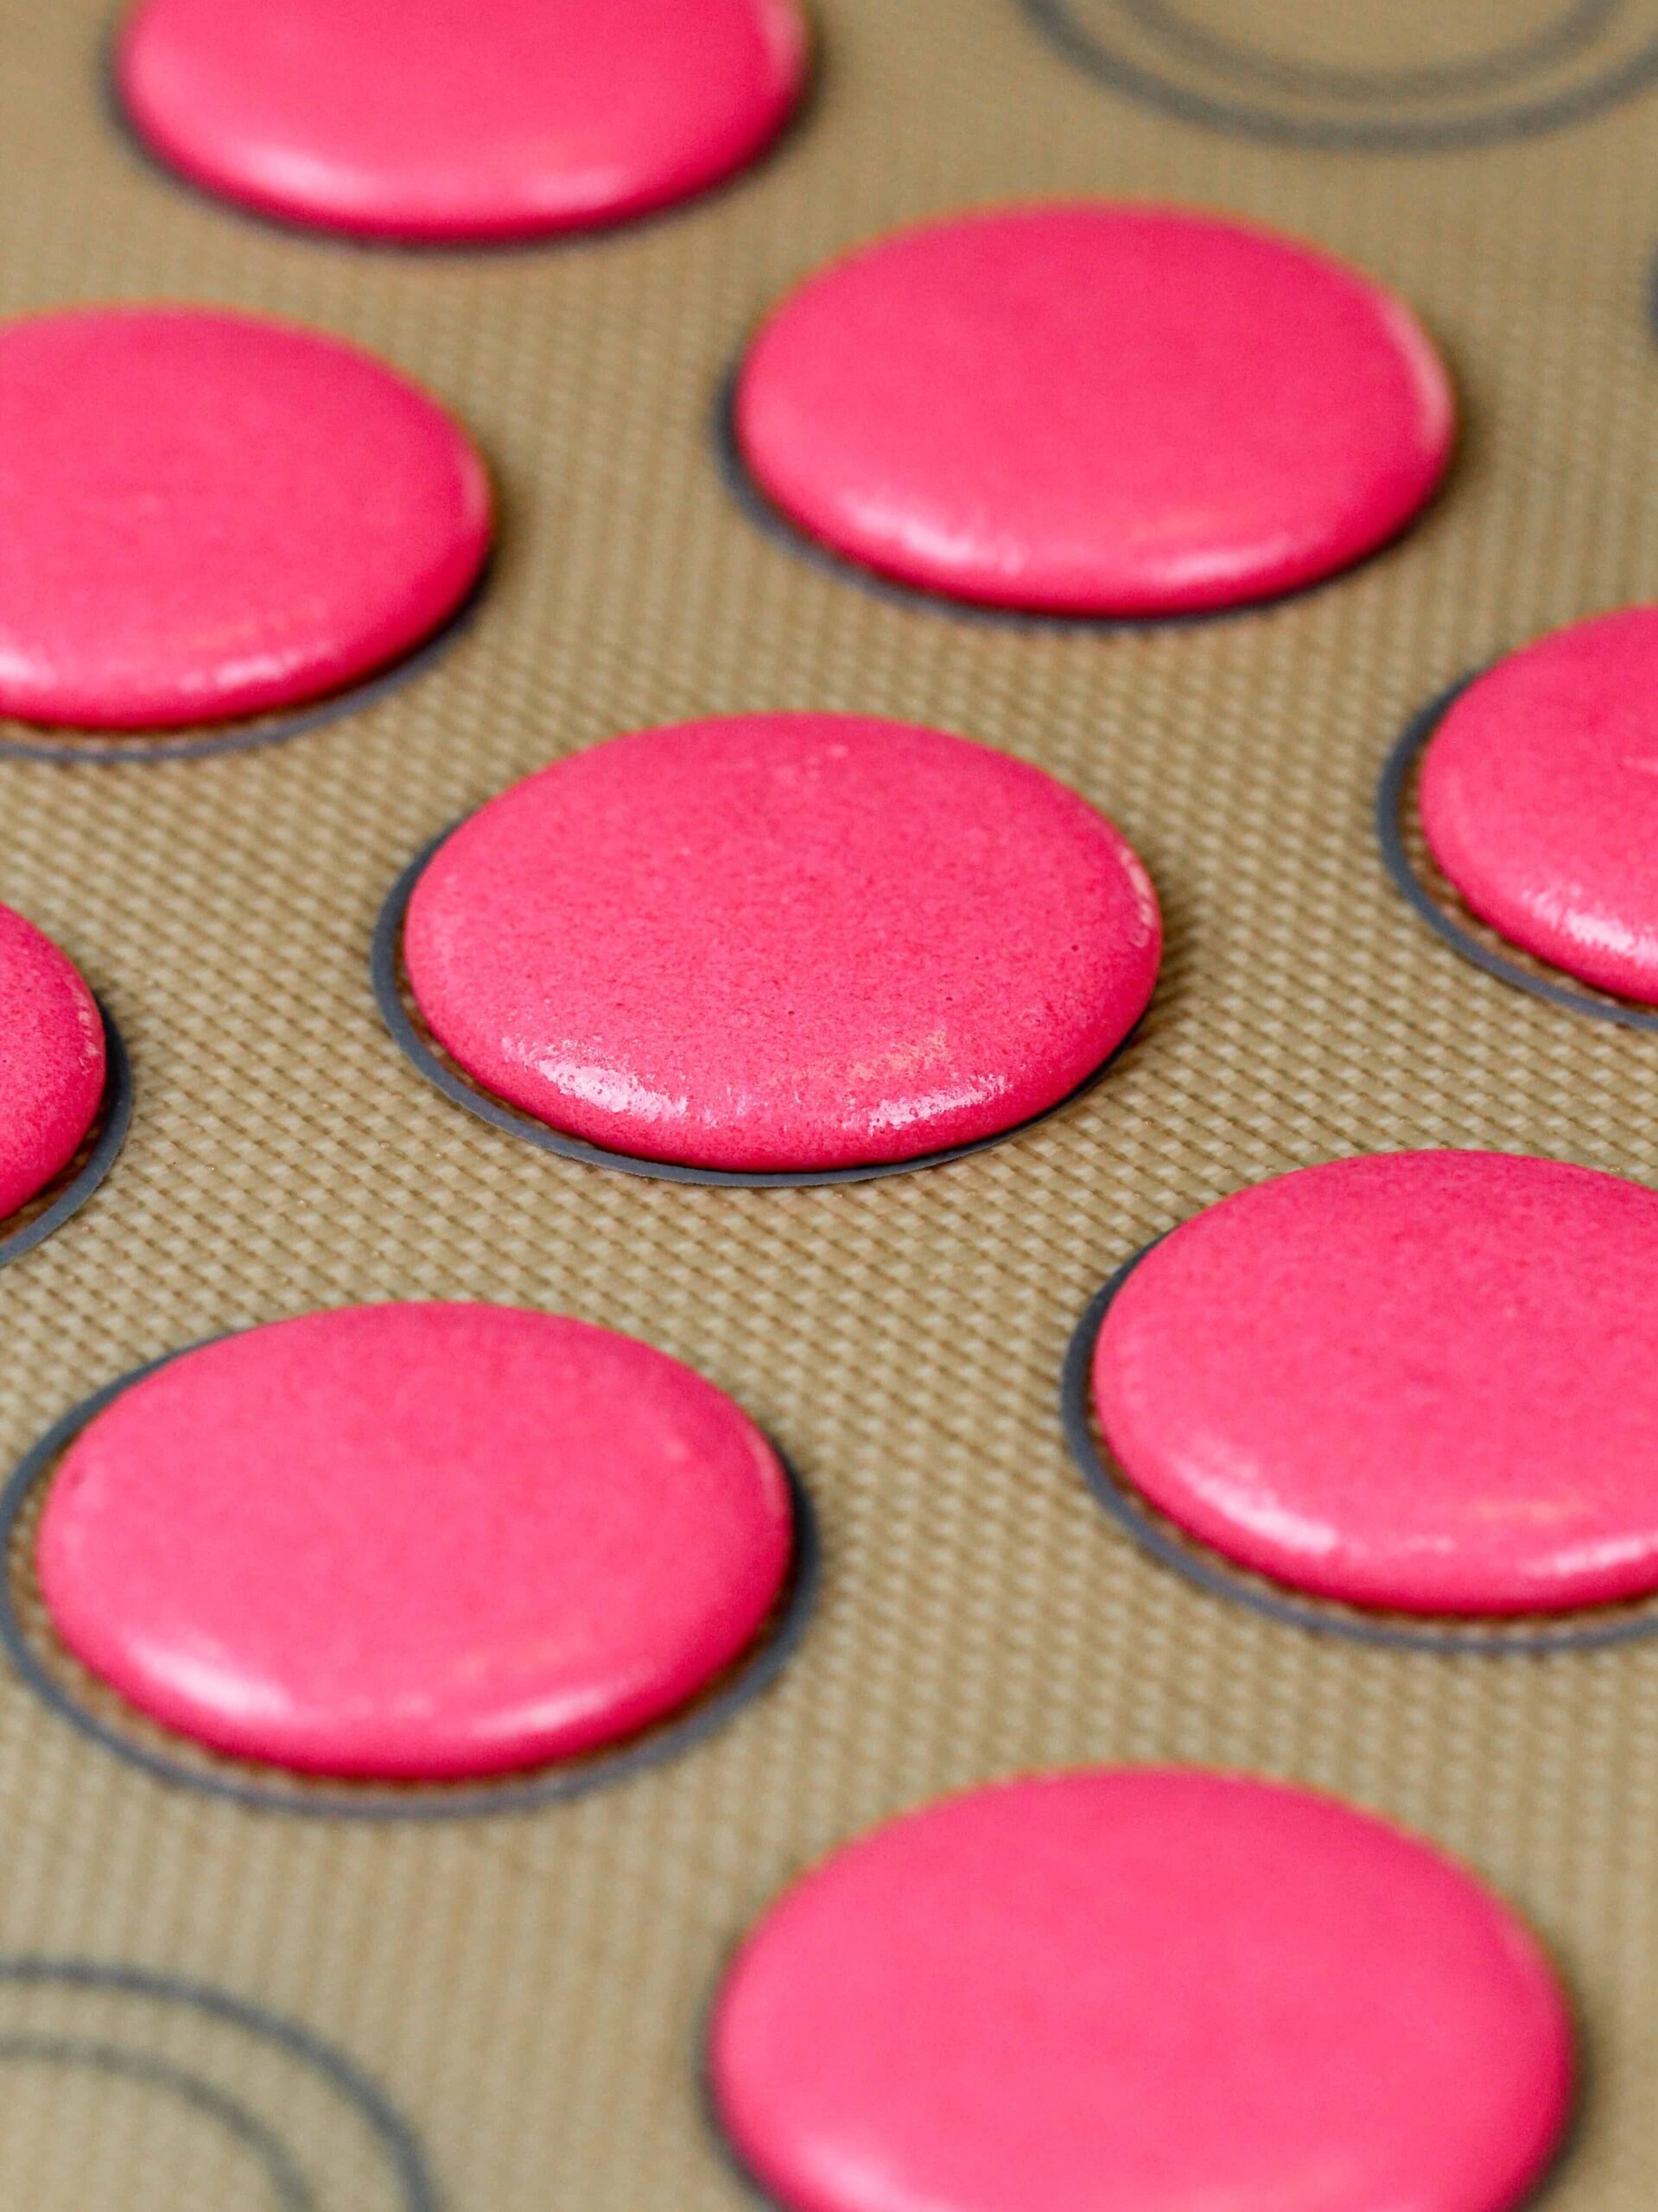 image of pink macaron shells that have rested and formed a skin and are now ready to be baked